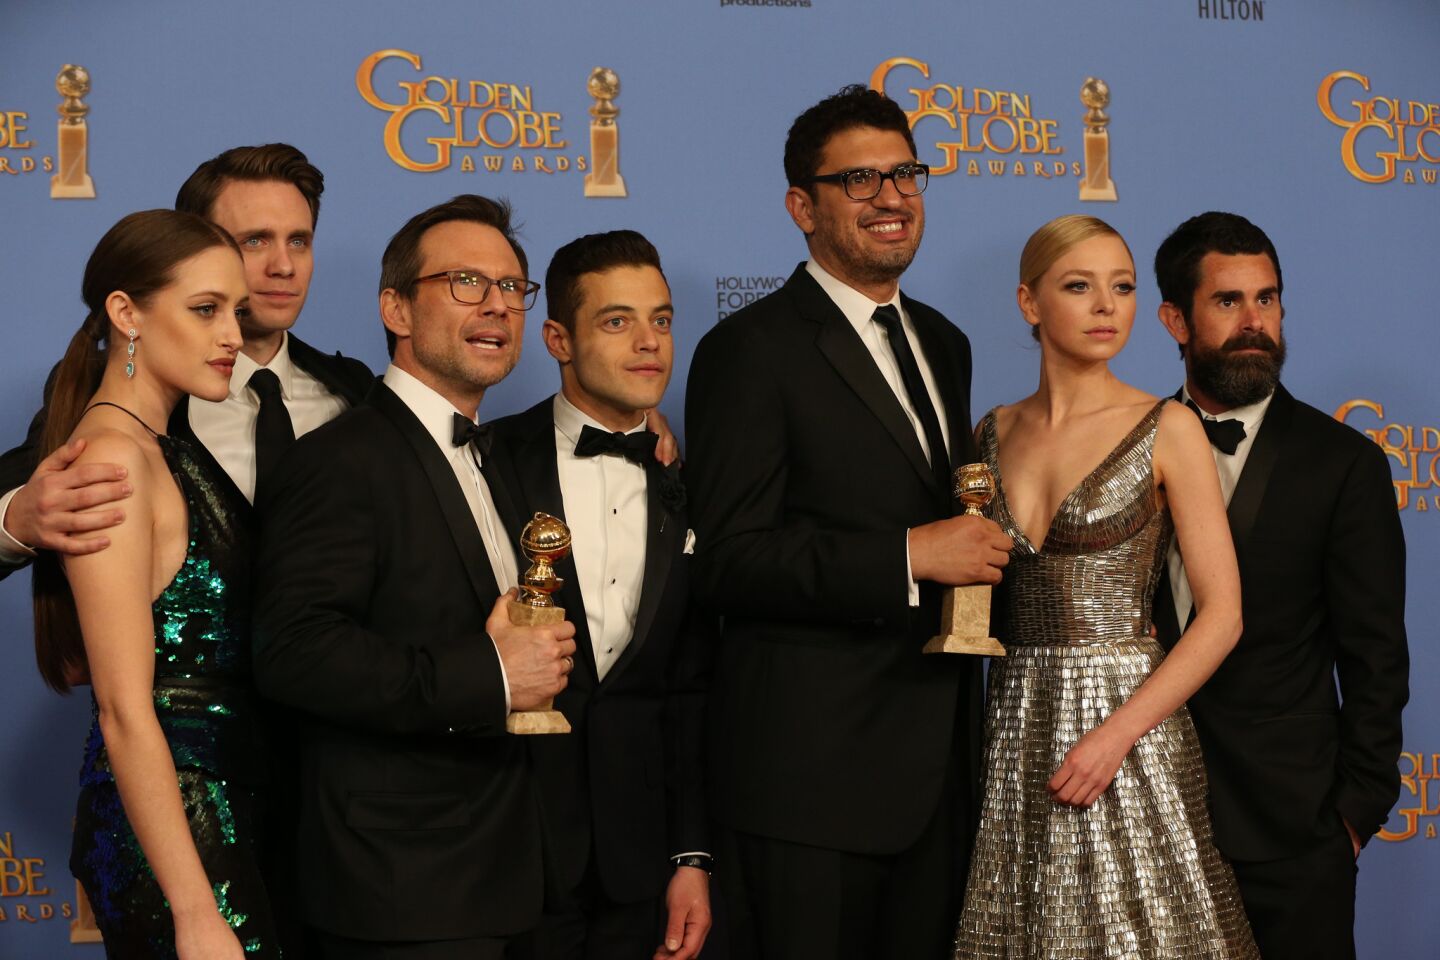 "Mr. Robot" creator Sam Esmail, center, and the cast pose together after winning the Golden Globe award for best TV series drama.